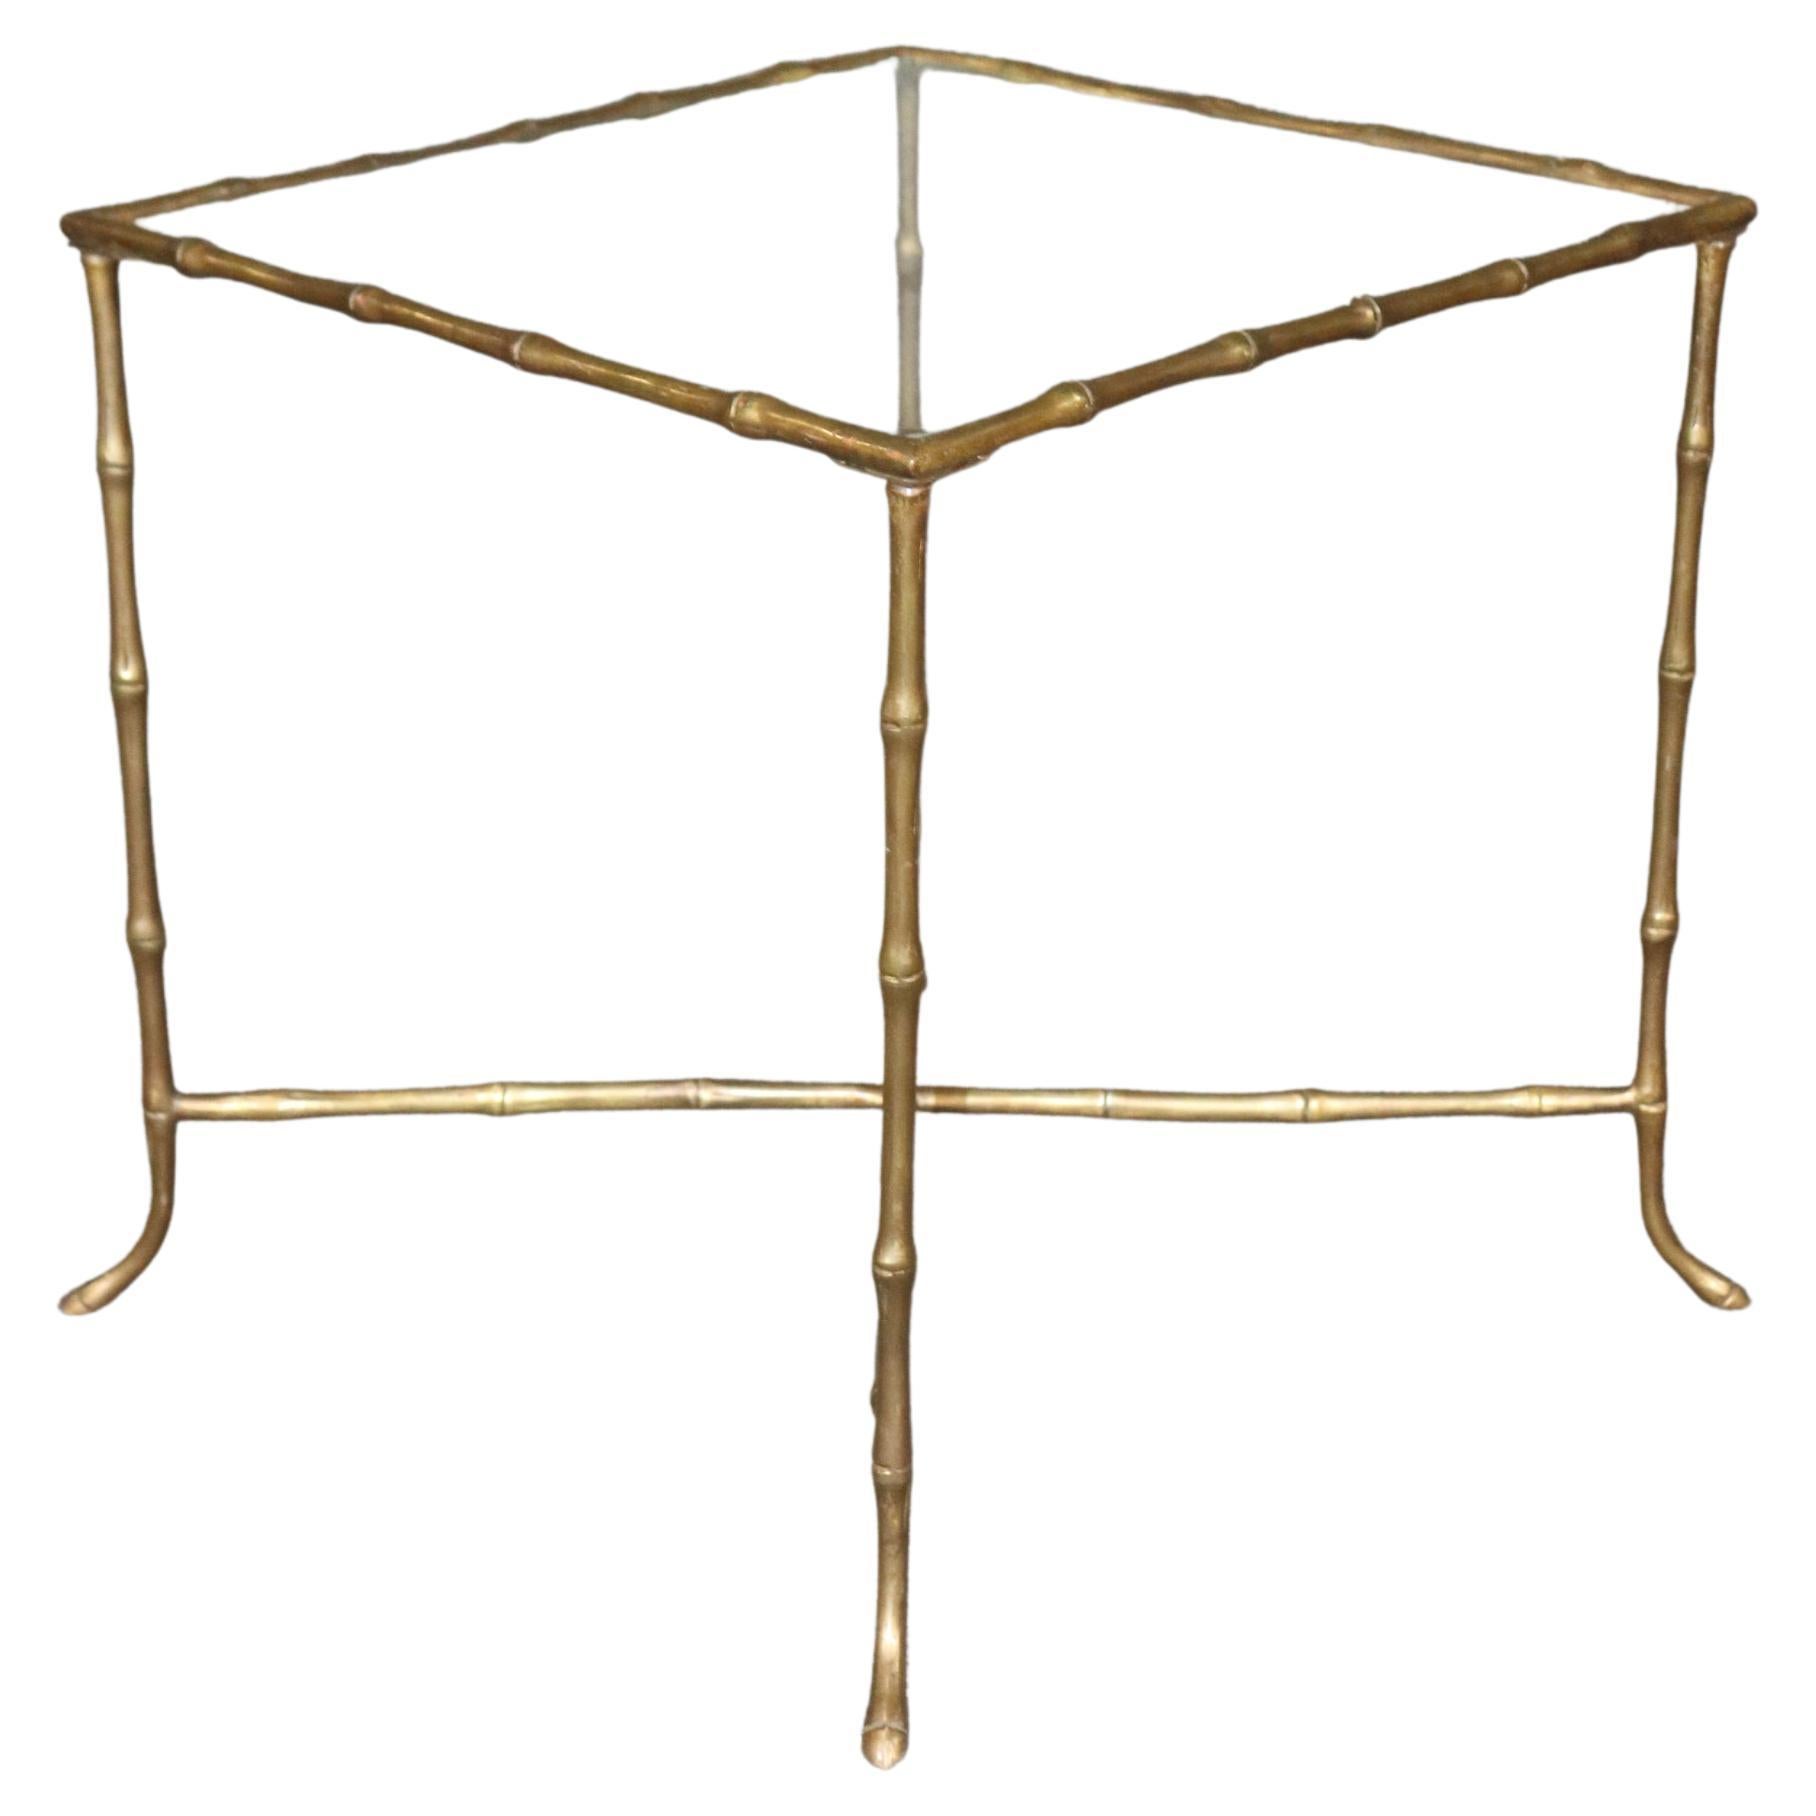 Sophistictated Maison Bagues Style Square Faux Bamboo End Table, circa 1960